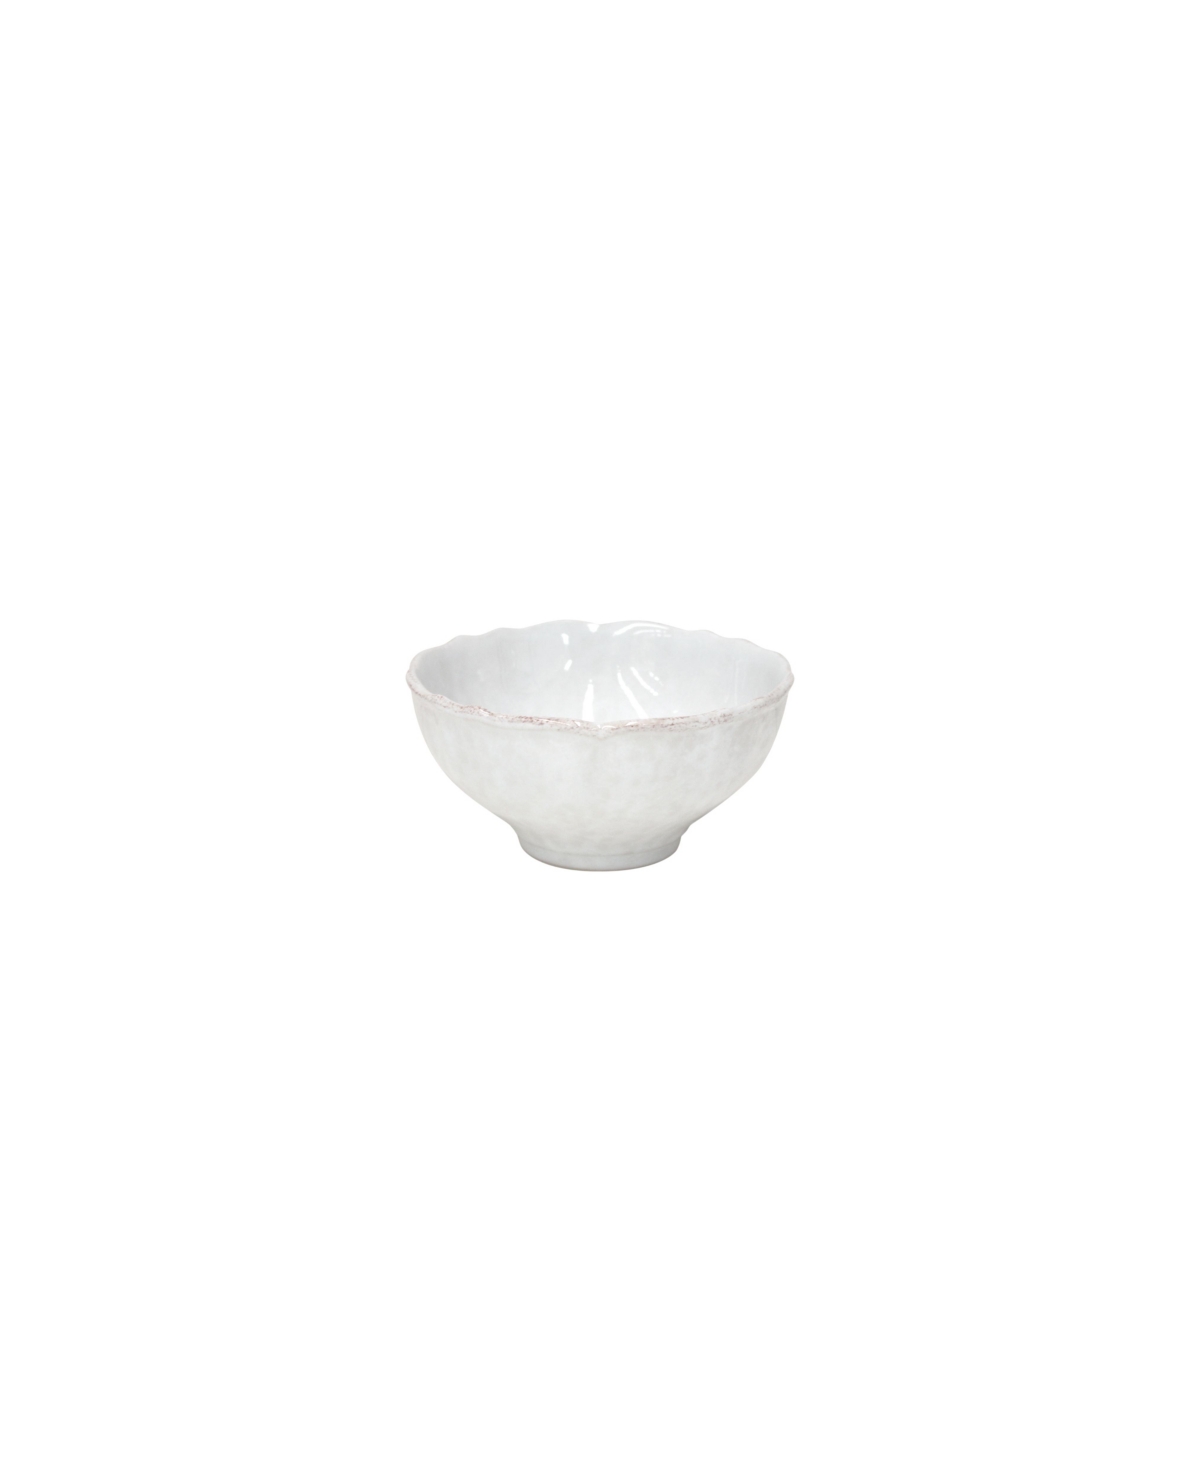 Impressions White Soup/Cereal Bowl - White